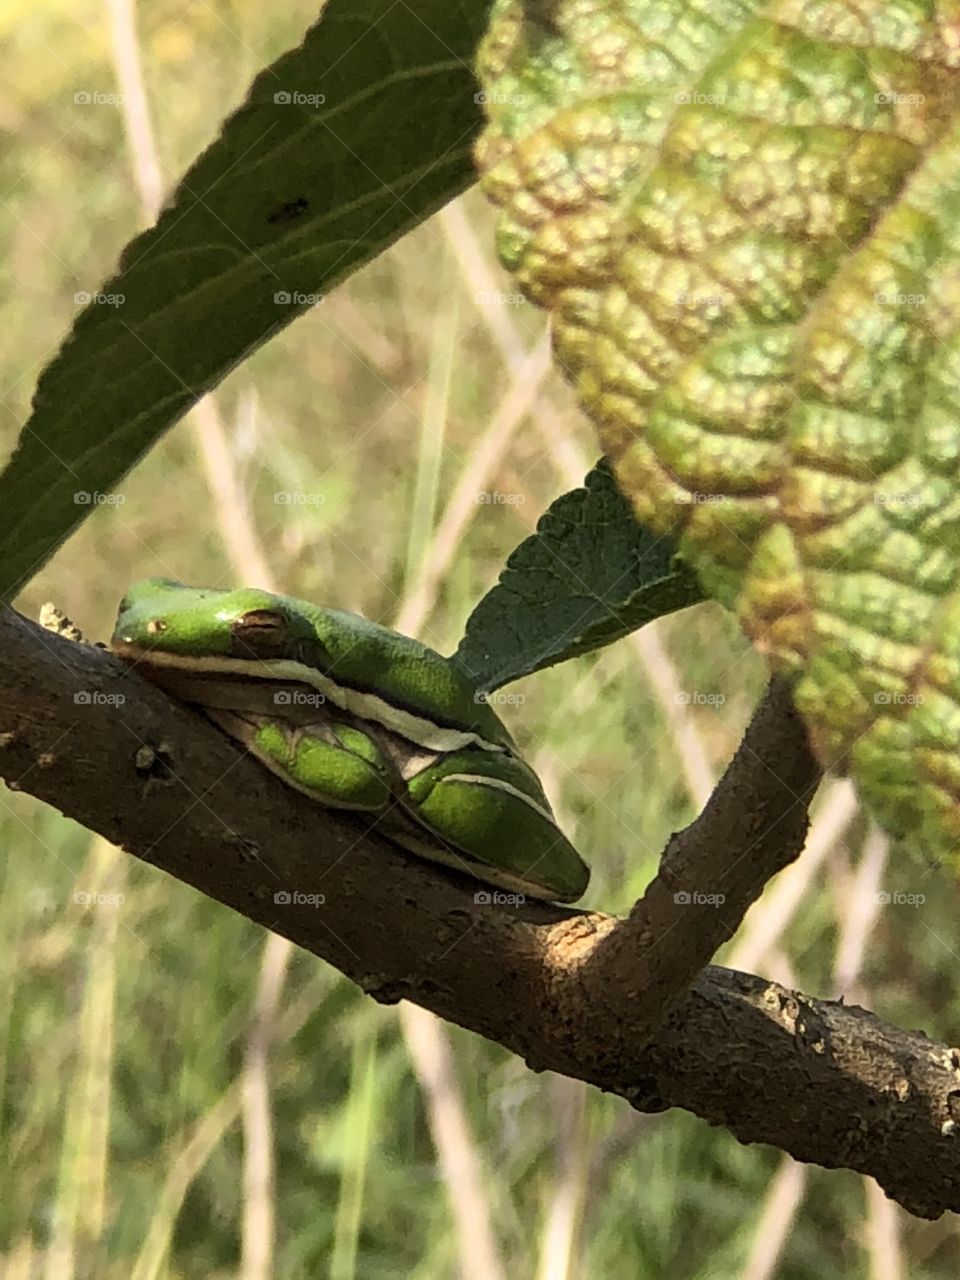 Tree frog taking a nap 